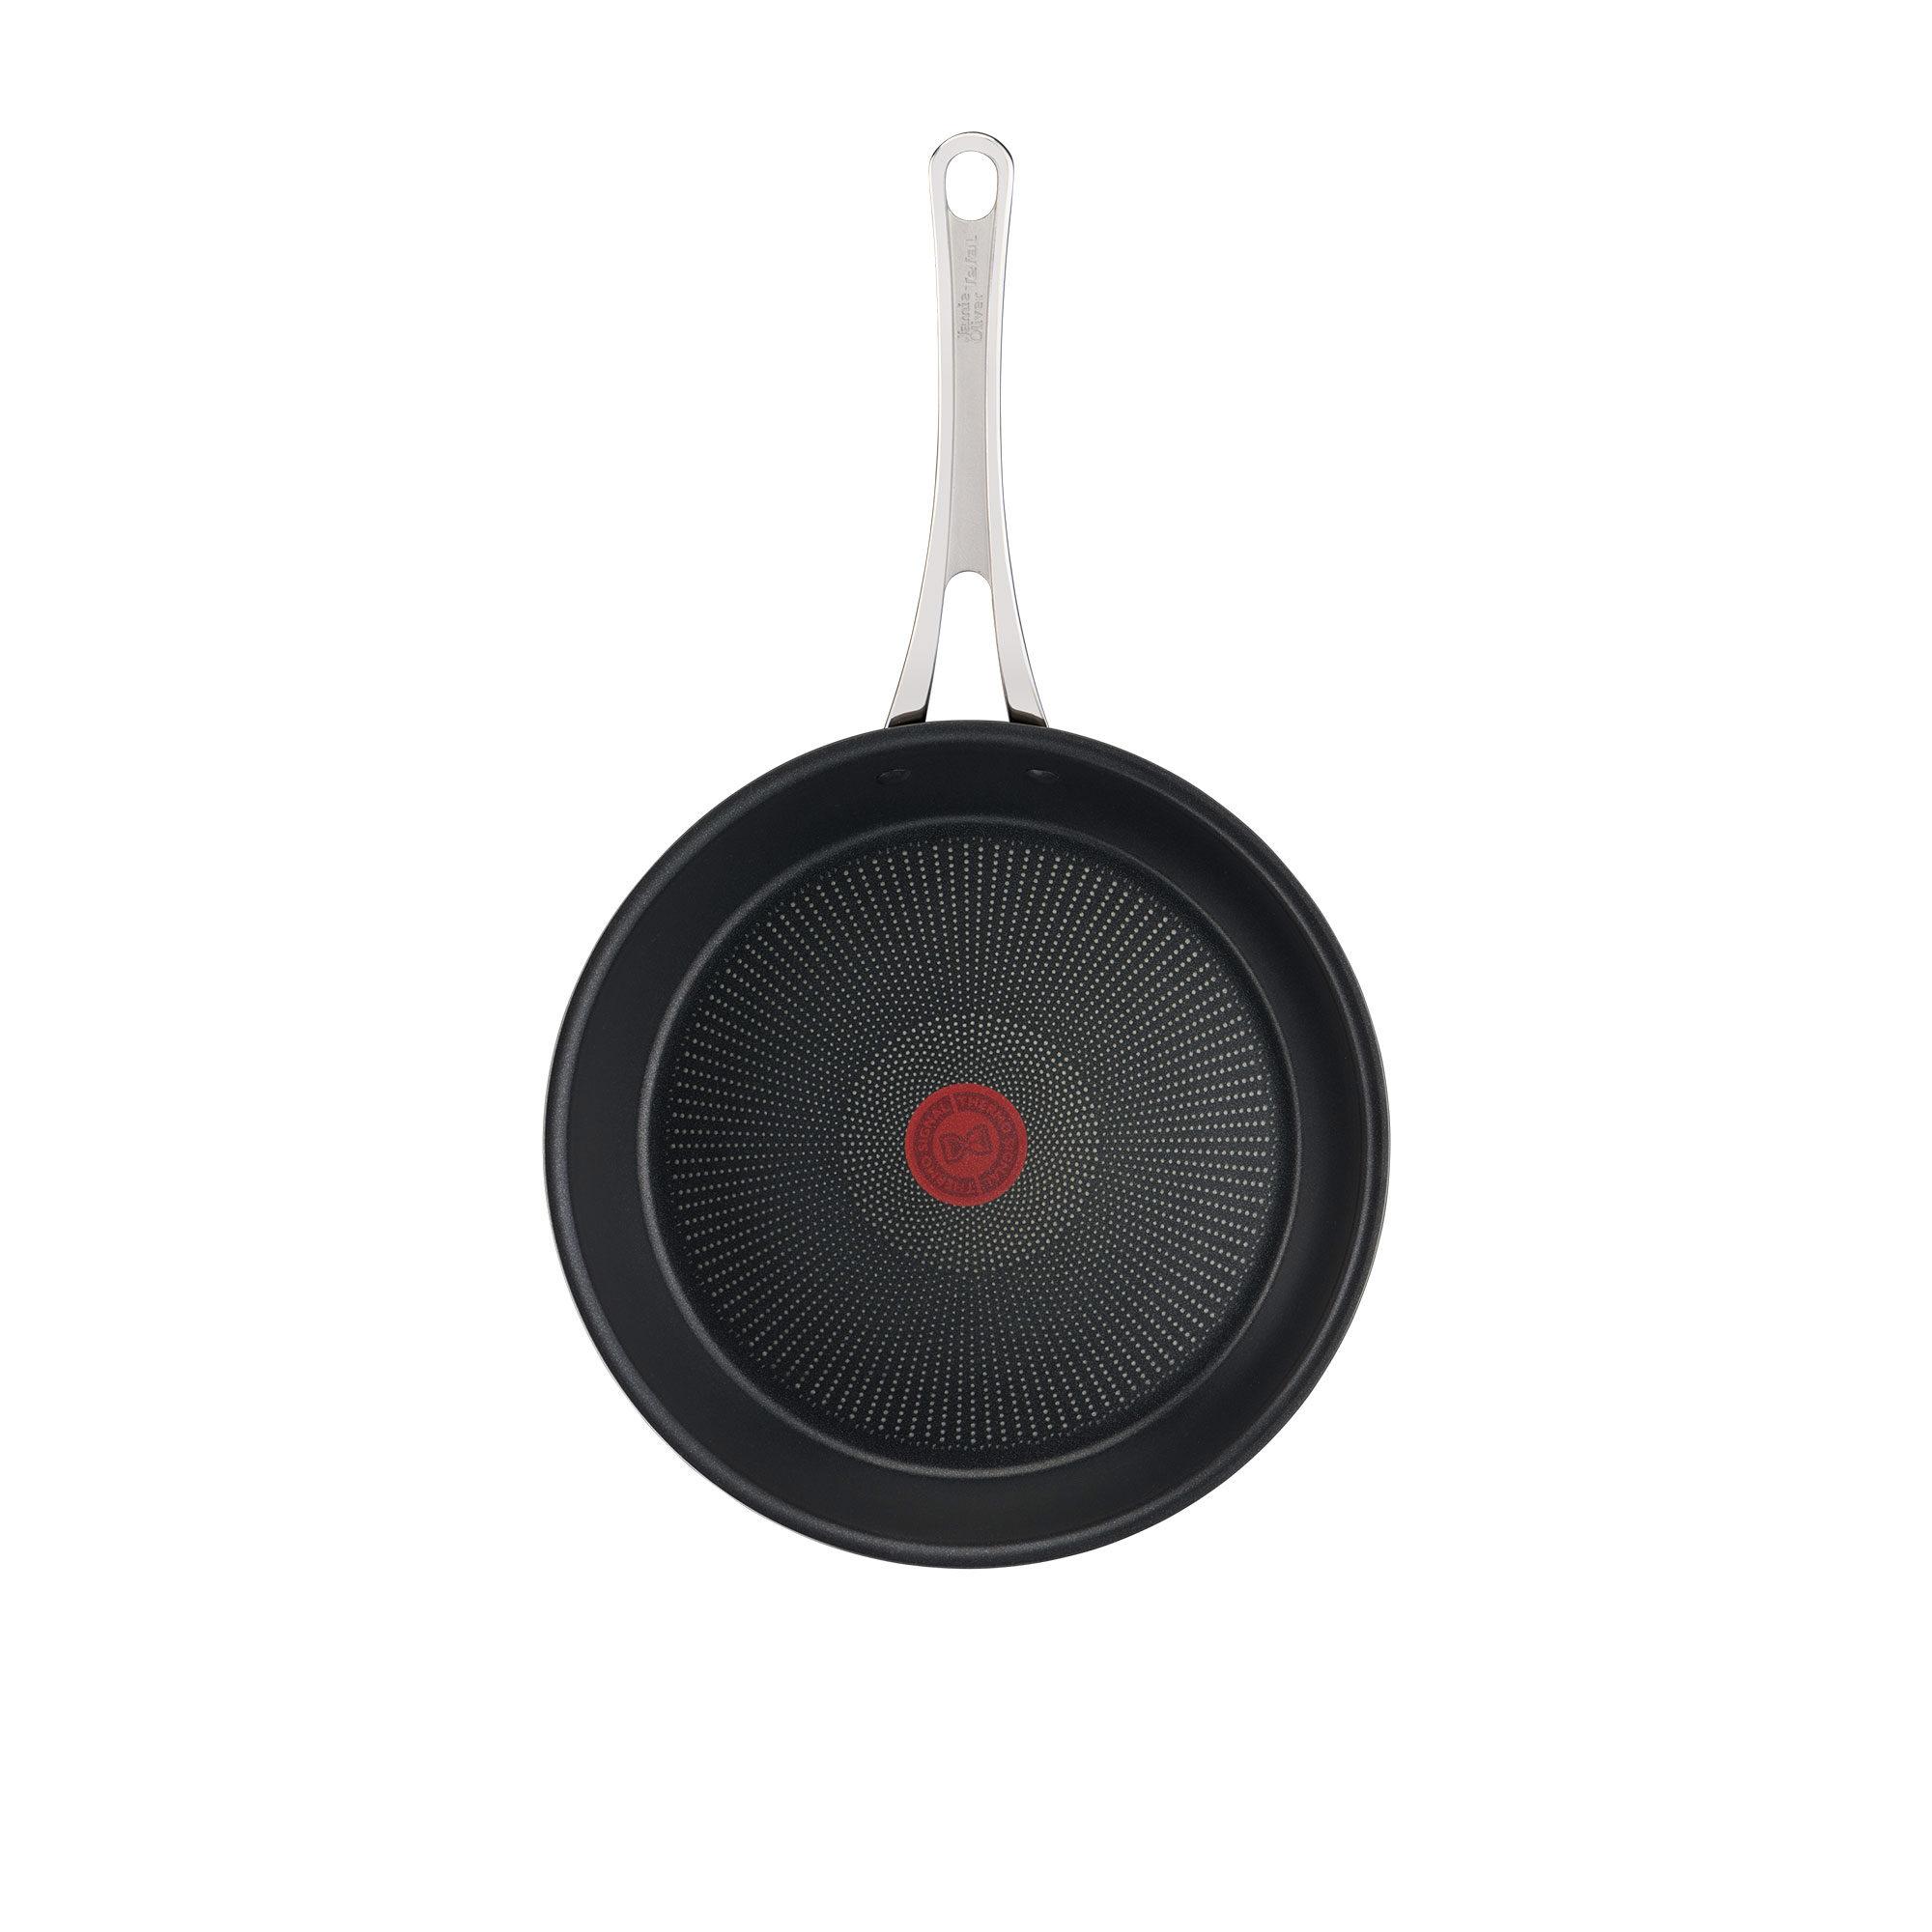 Jamie Oliver by Tefal Cook's Classic Hard Anodised Induction Frypan 30cm Image 5